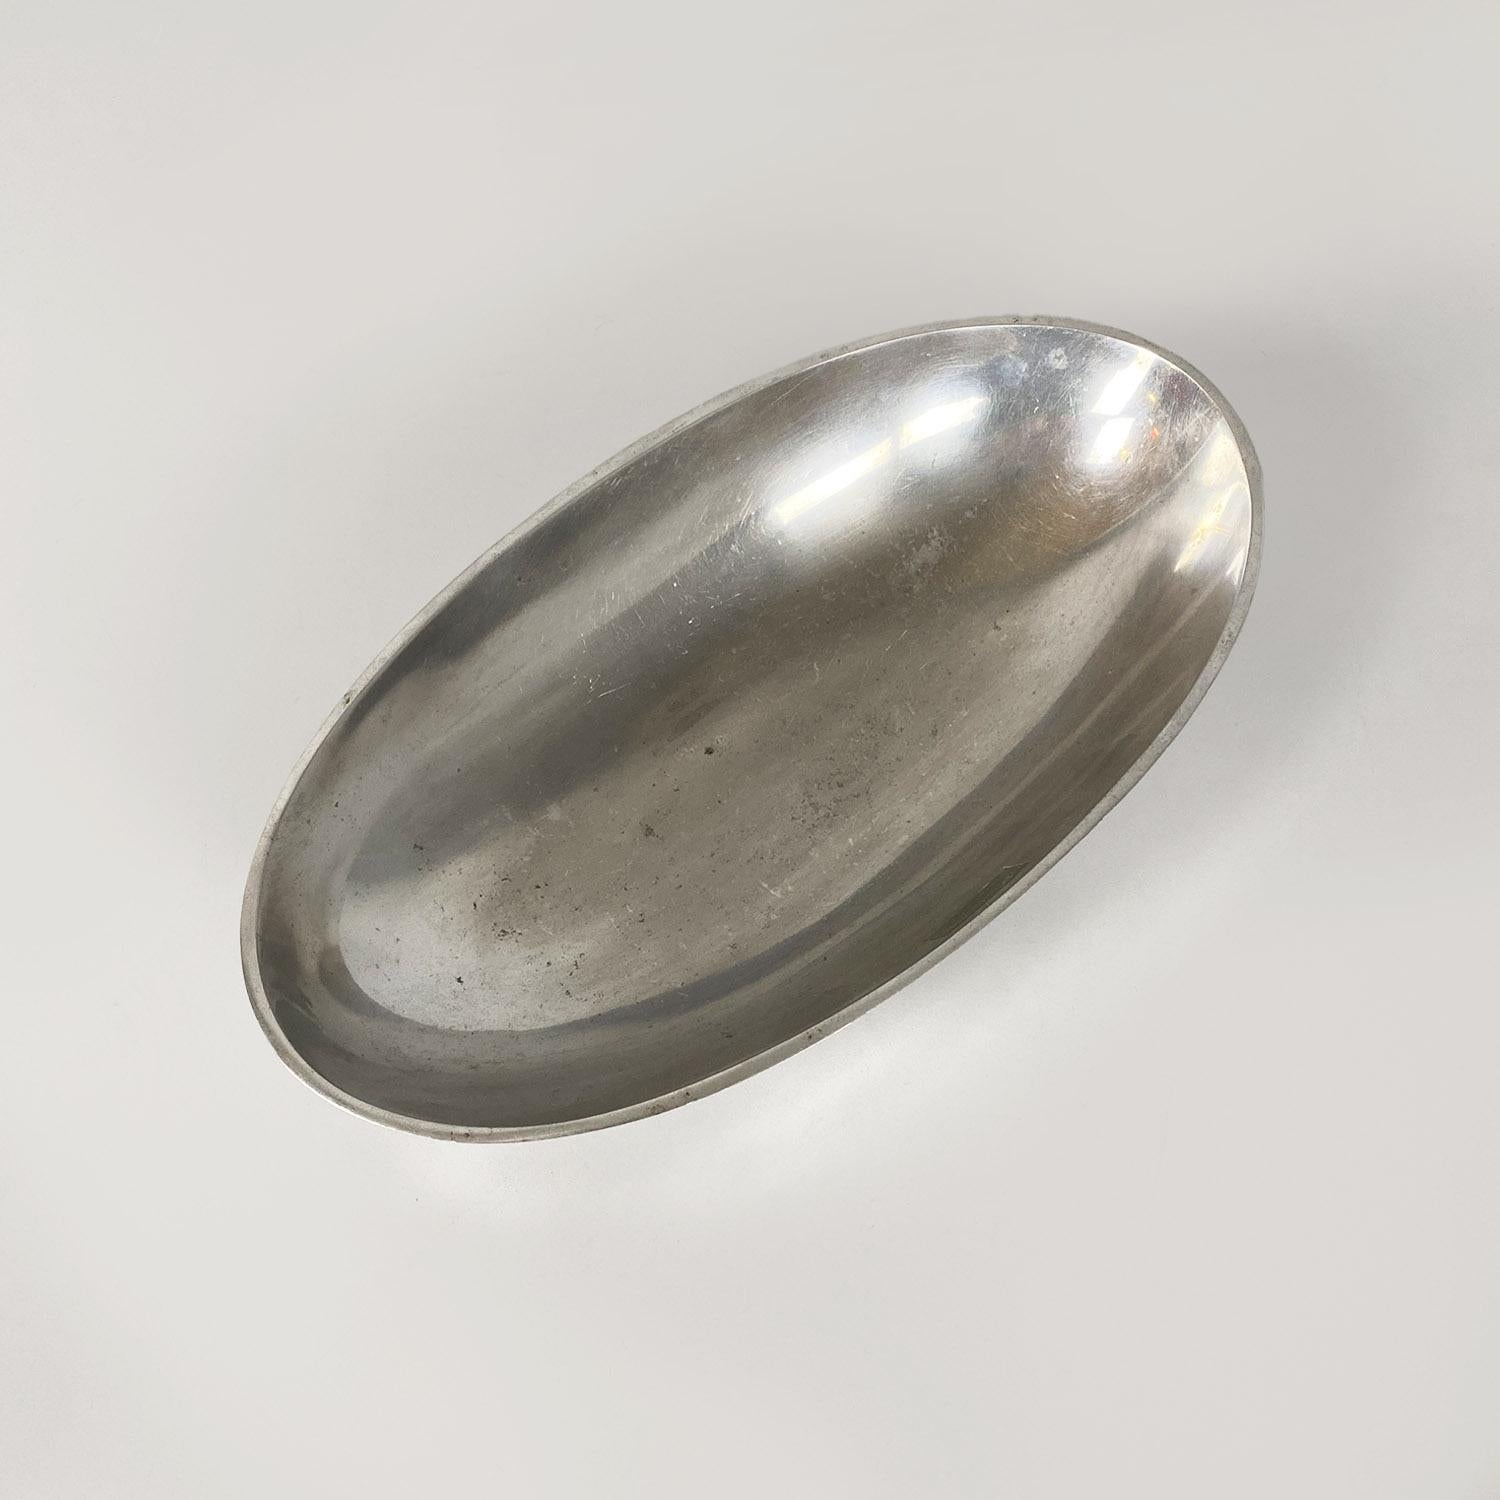 Italian modern metal oval serving bowl or container by La Rinascente, 1990s For Sale 2